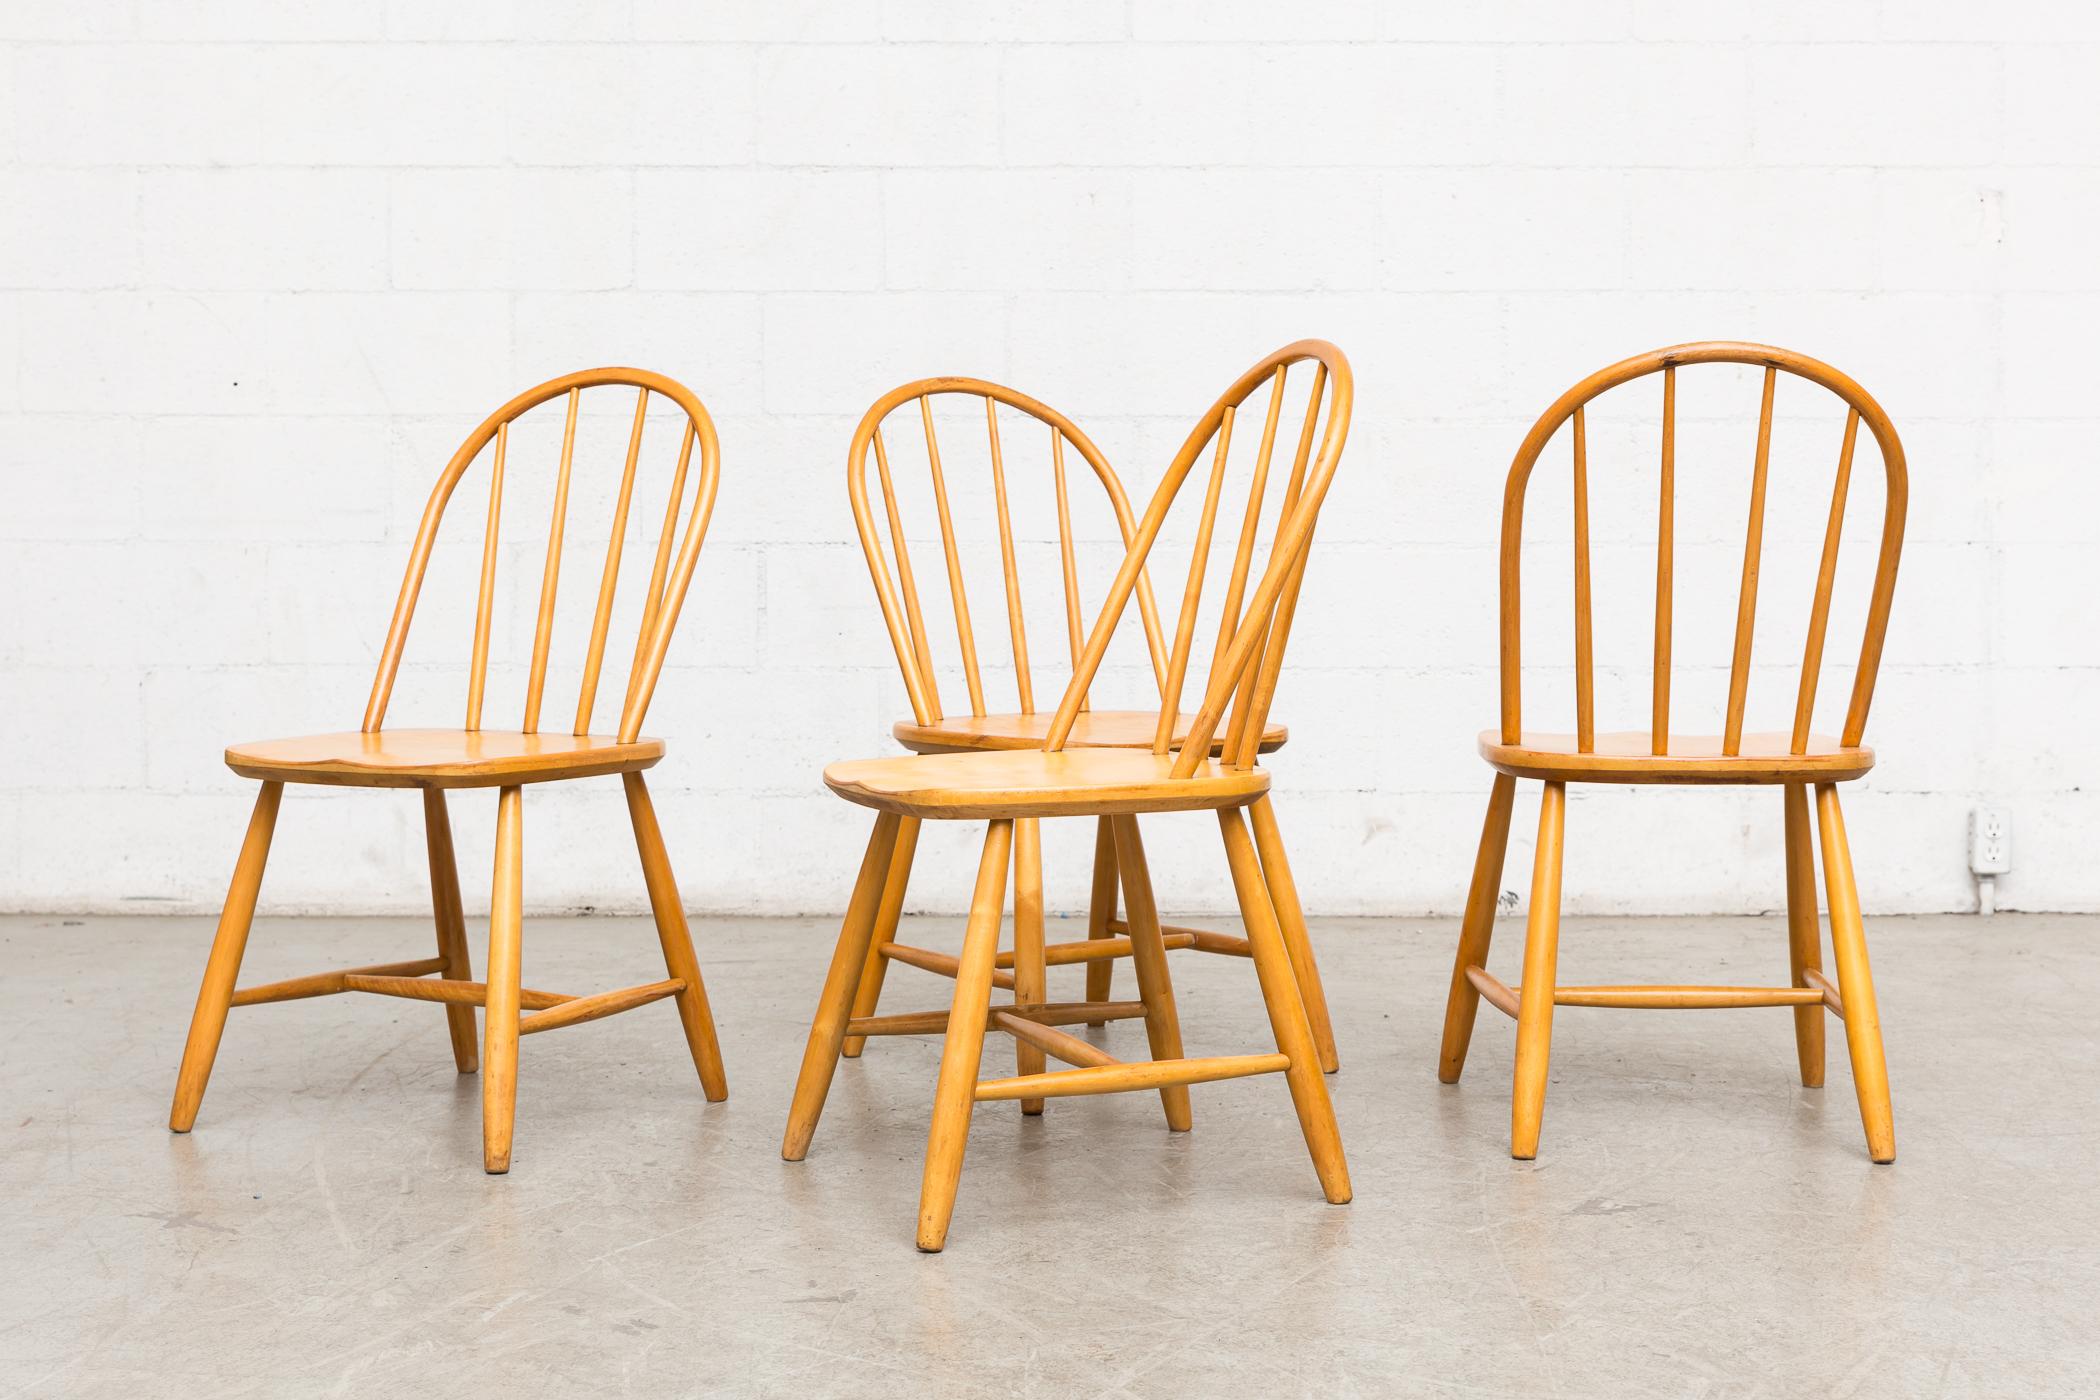 Set of 4 Tapiovaara inspired natural spindle back chairs. lightly refinished, slightly low seat height, Otherwise in good natural condition. Priced as a set. Other similar chairs available and listed separately